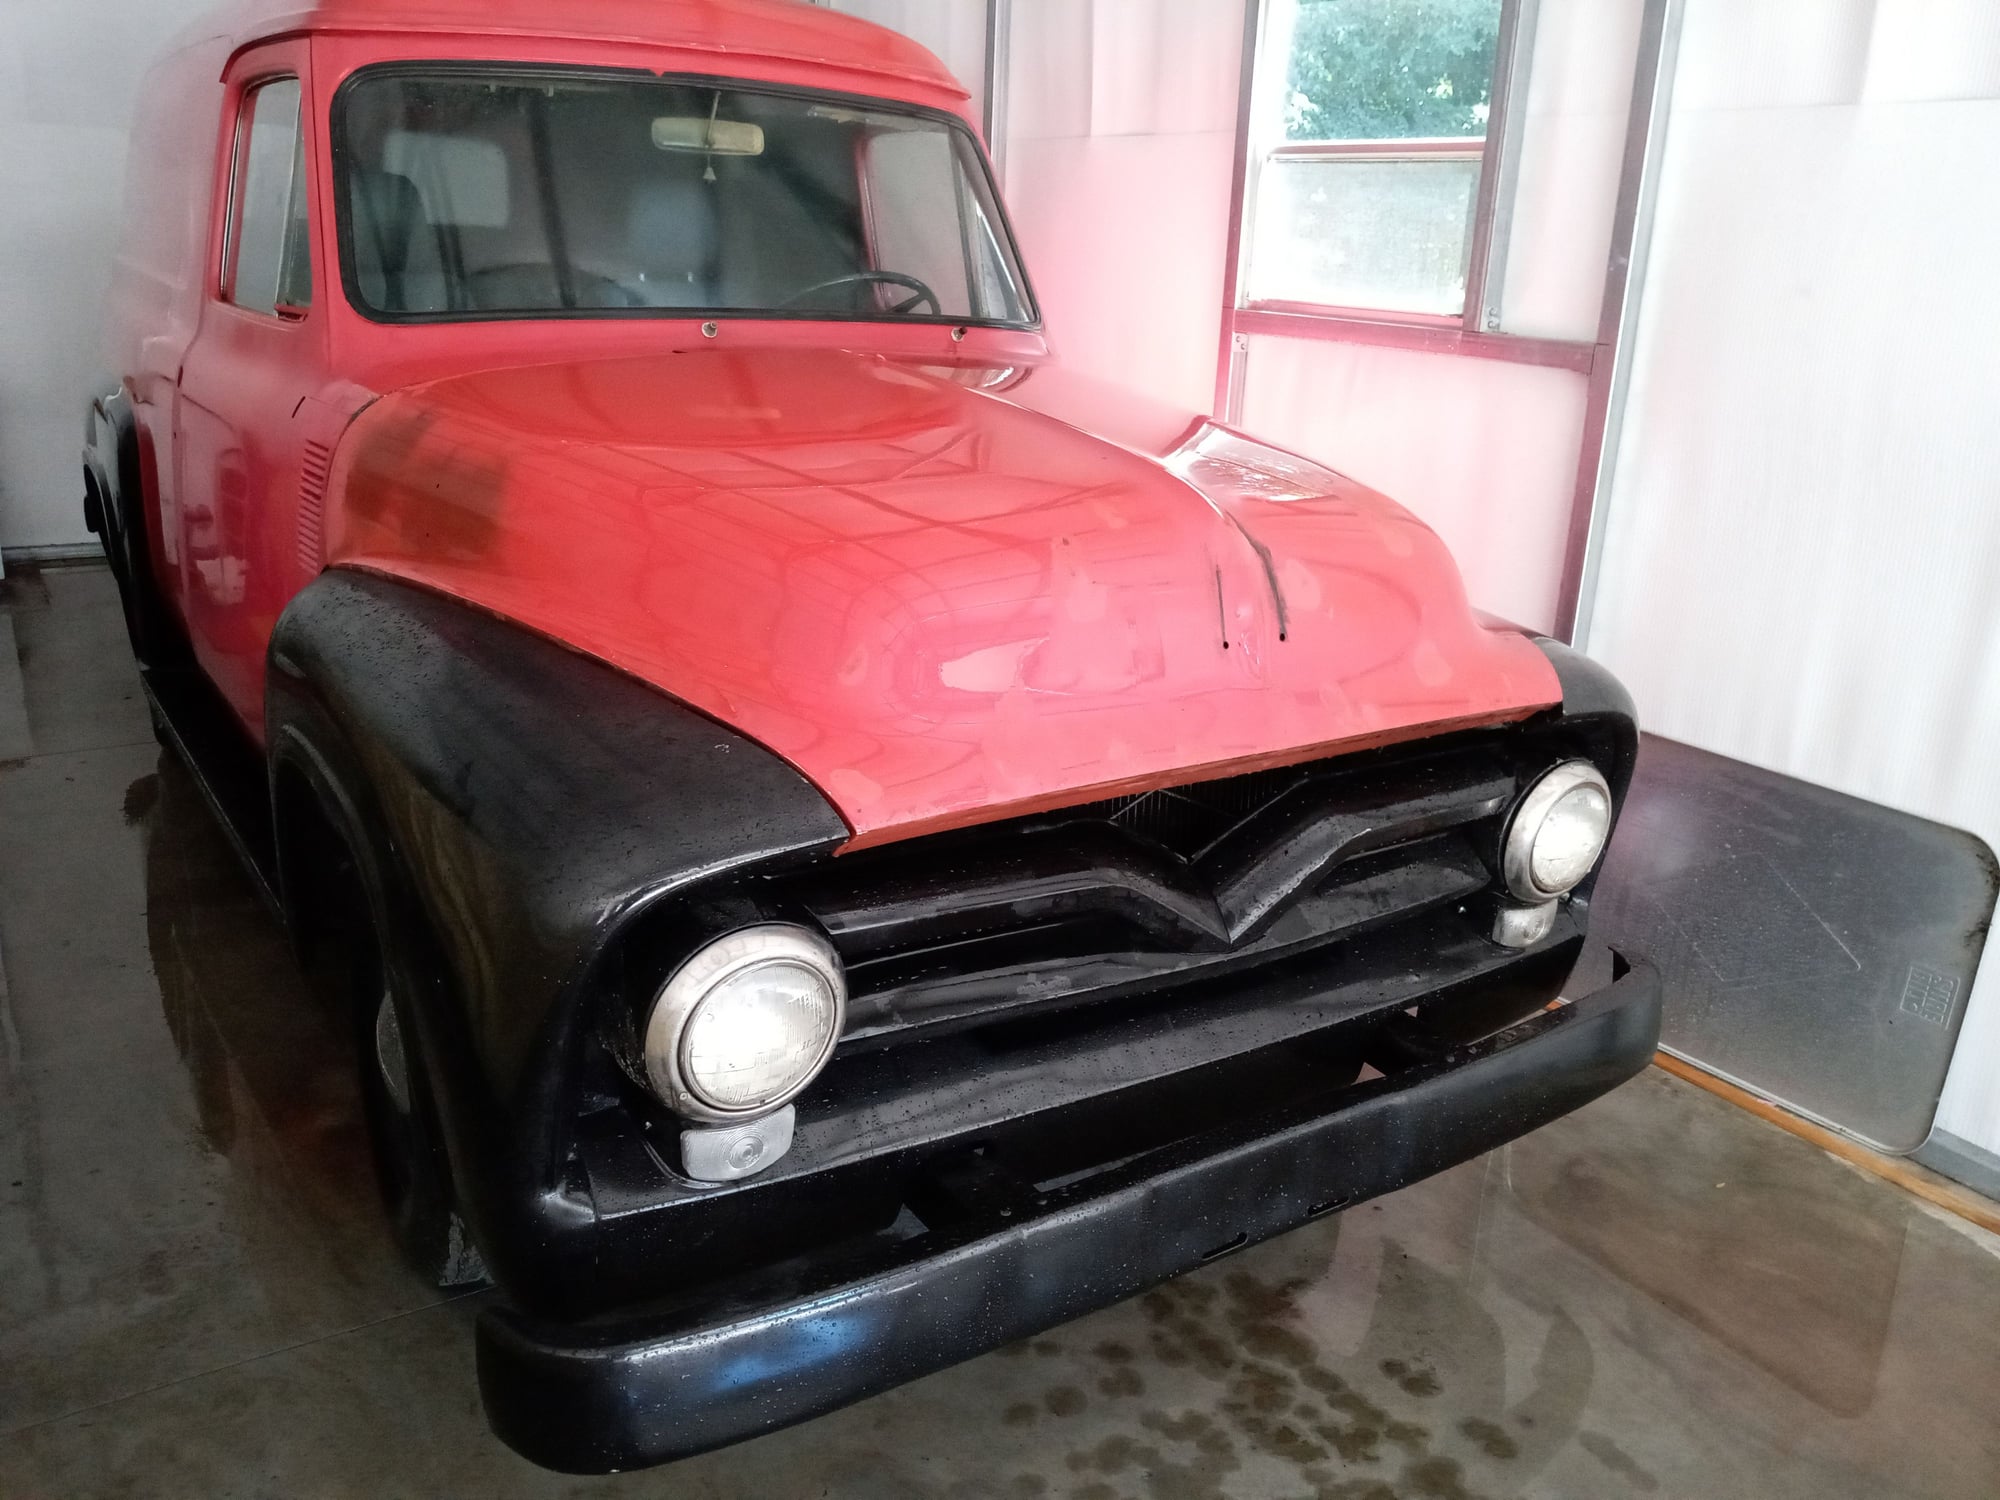 1955 Ford F-100 - 1955 Ford F100 Panel truck for sale - Used - VIN F10D5U18902 - 13,609 Miles - 6 cyl - 2WD - Automatic - Truck - Red - West Springfield, MA 01089, United States